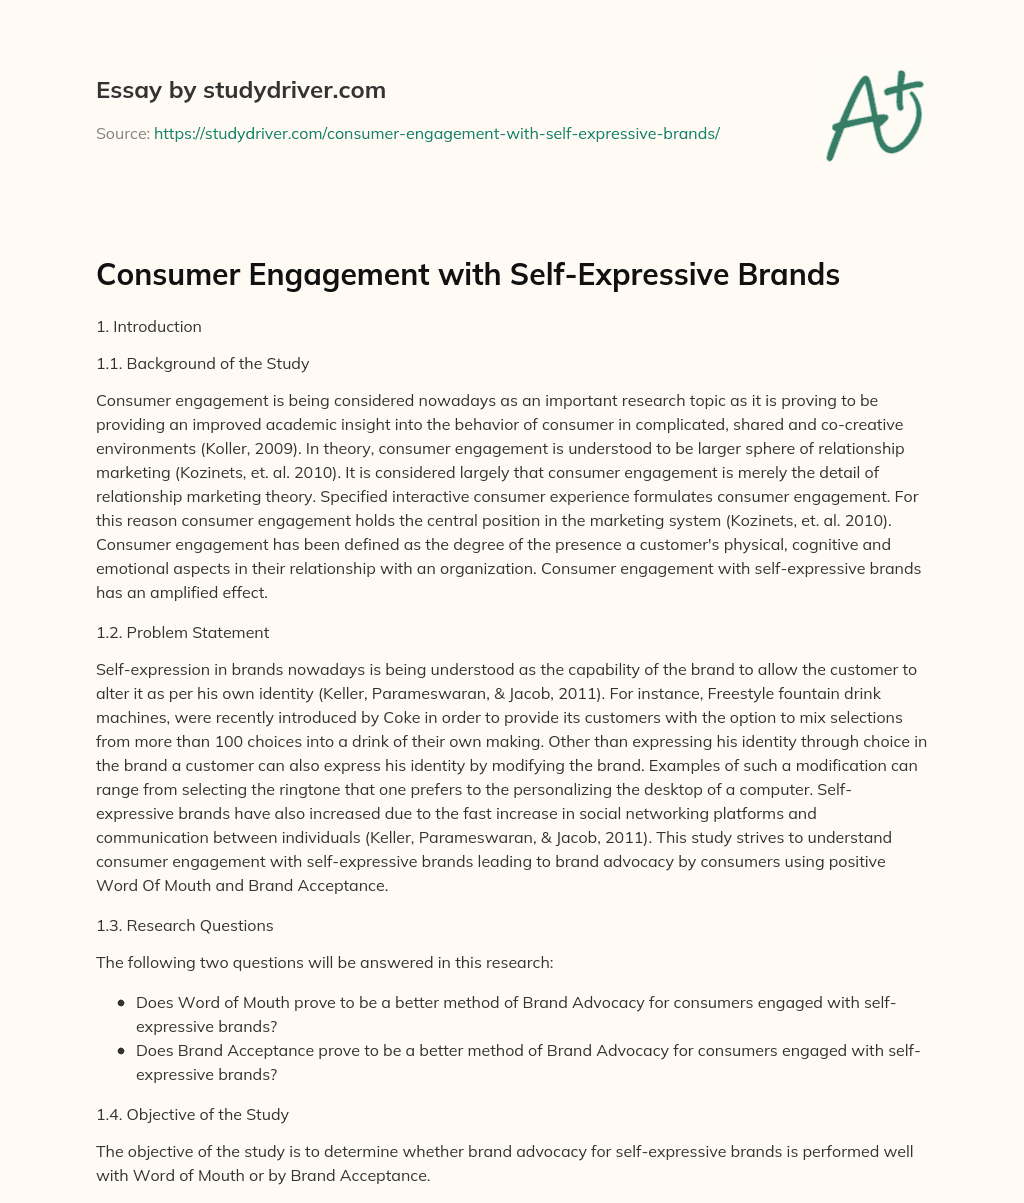 Consumer Engagement with Self-Expressive Brands essay